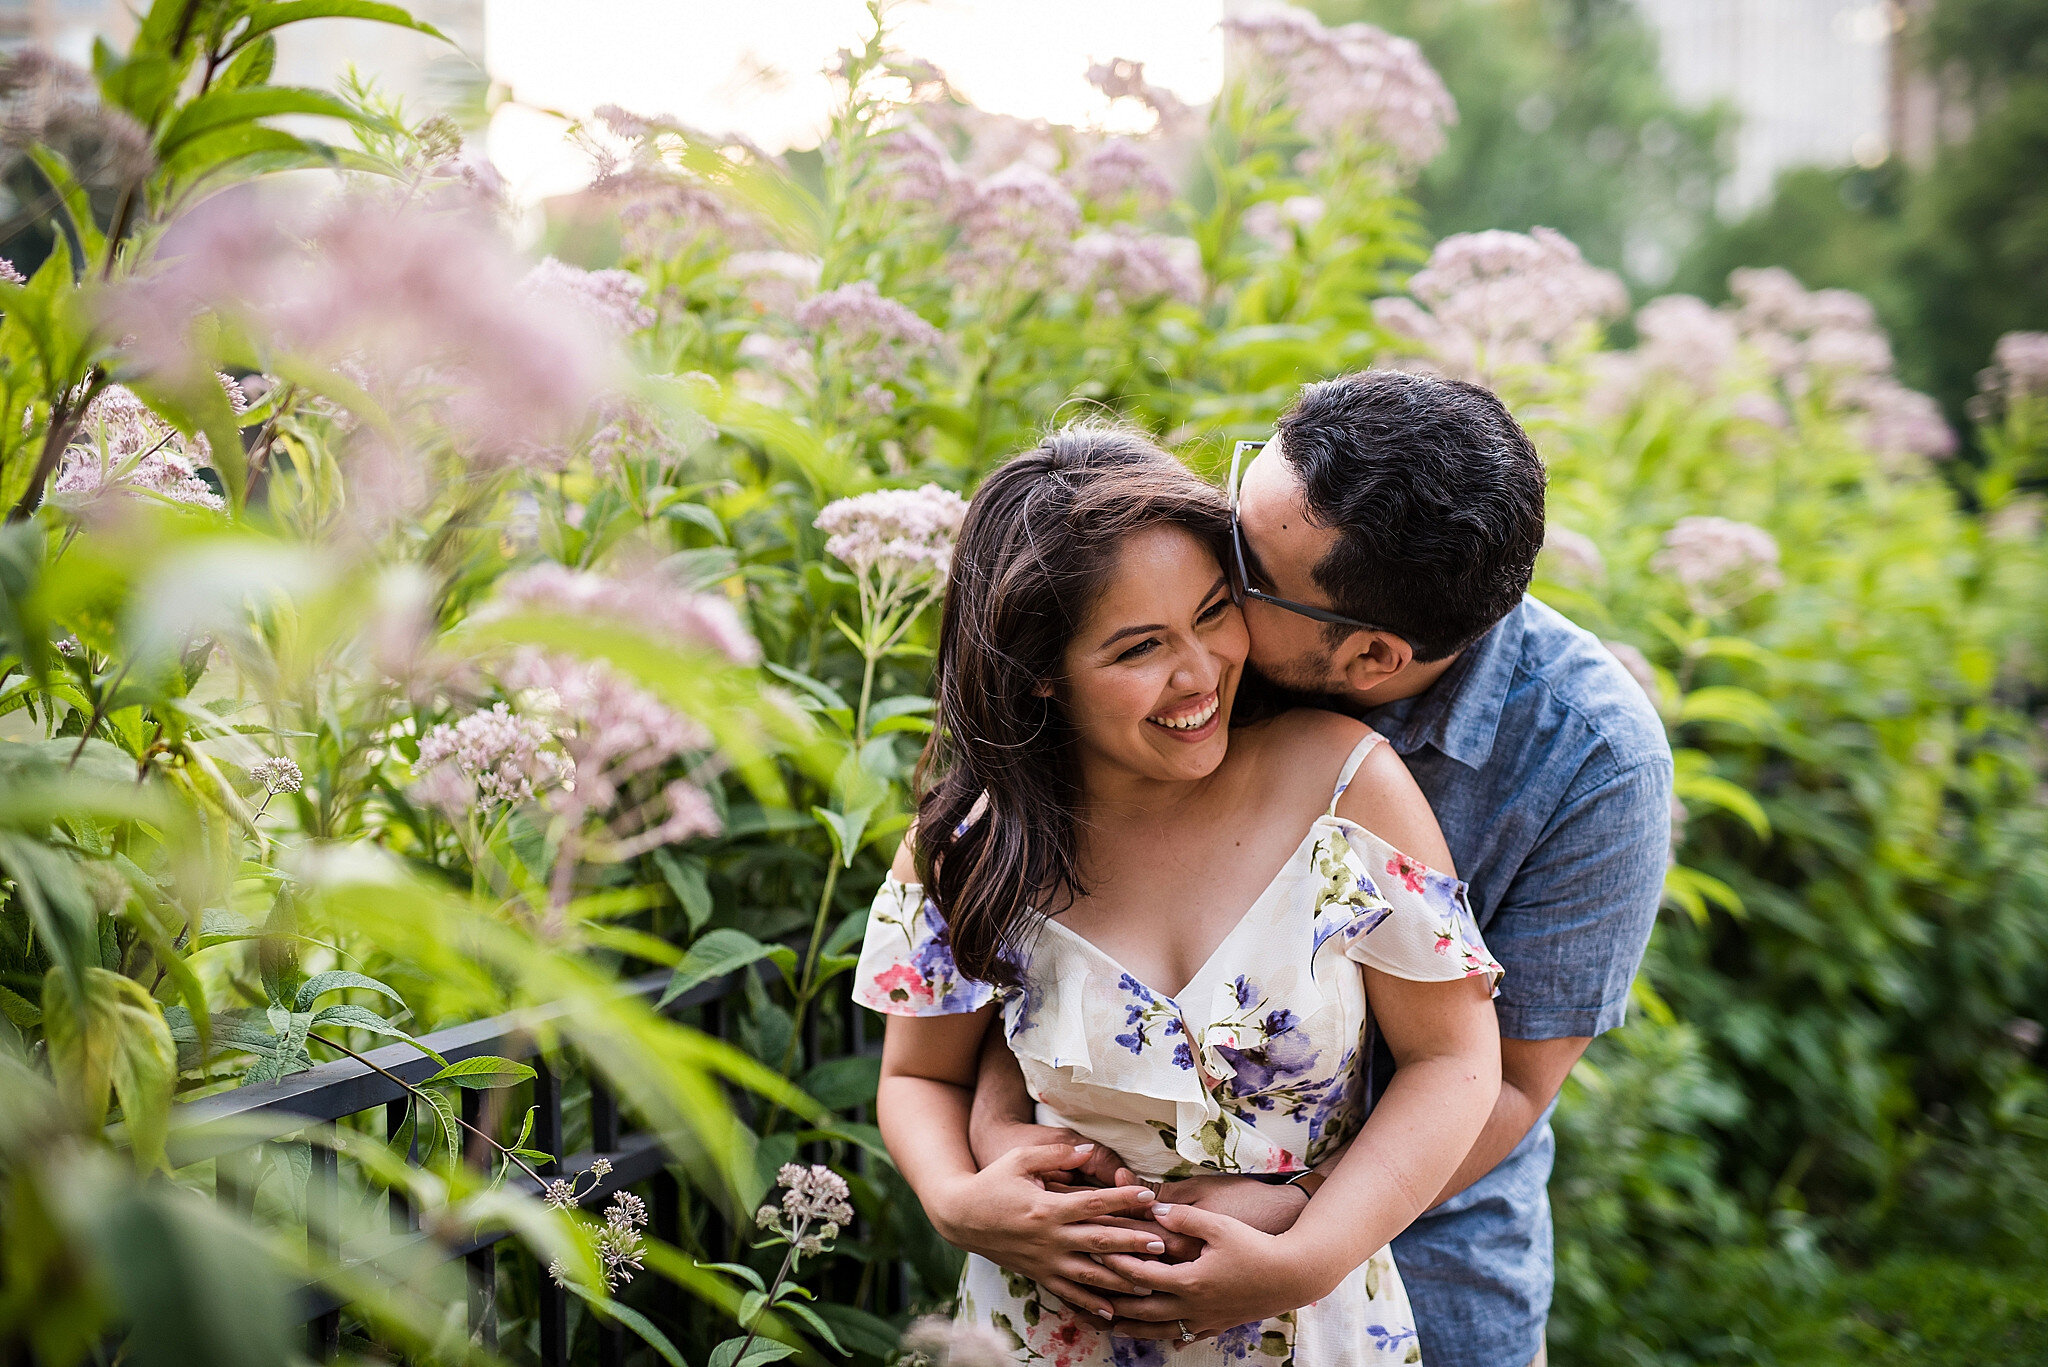 Flirty and Fun Summertime Chicago Engagement captured by Inspired Eye Photography featured on CHI thee WED